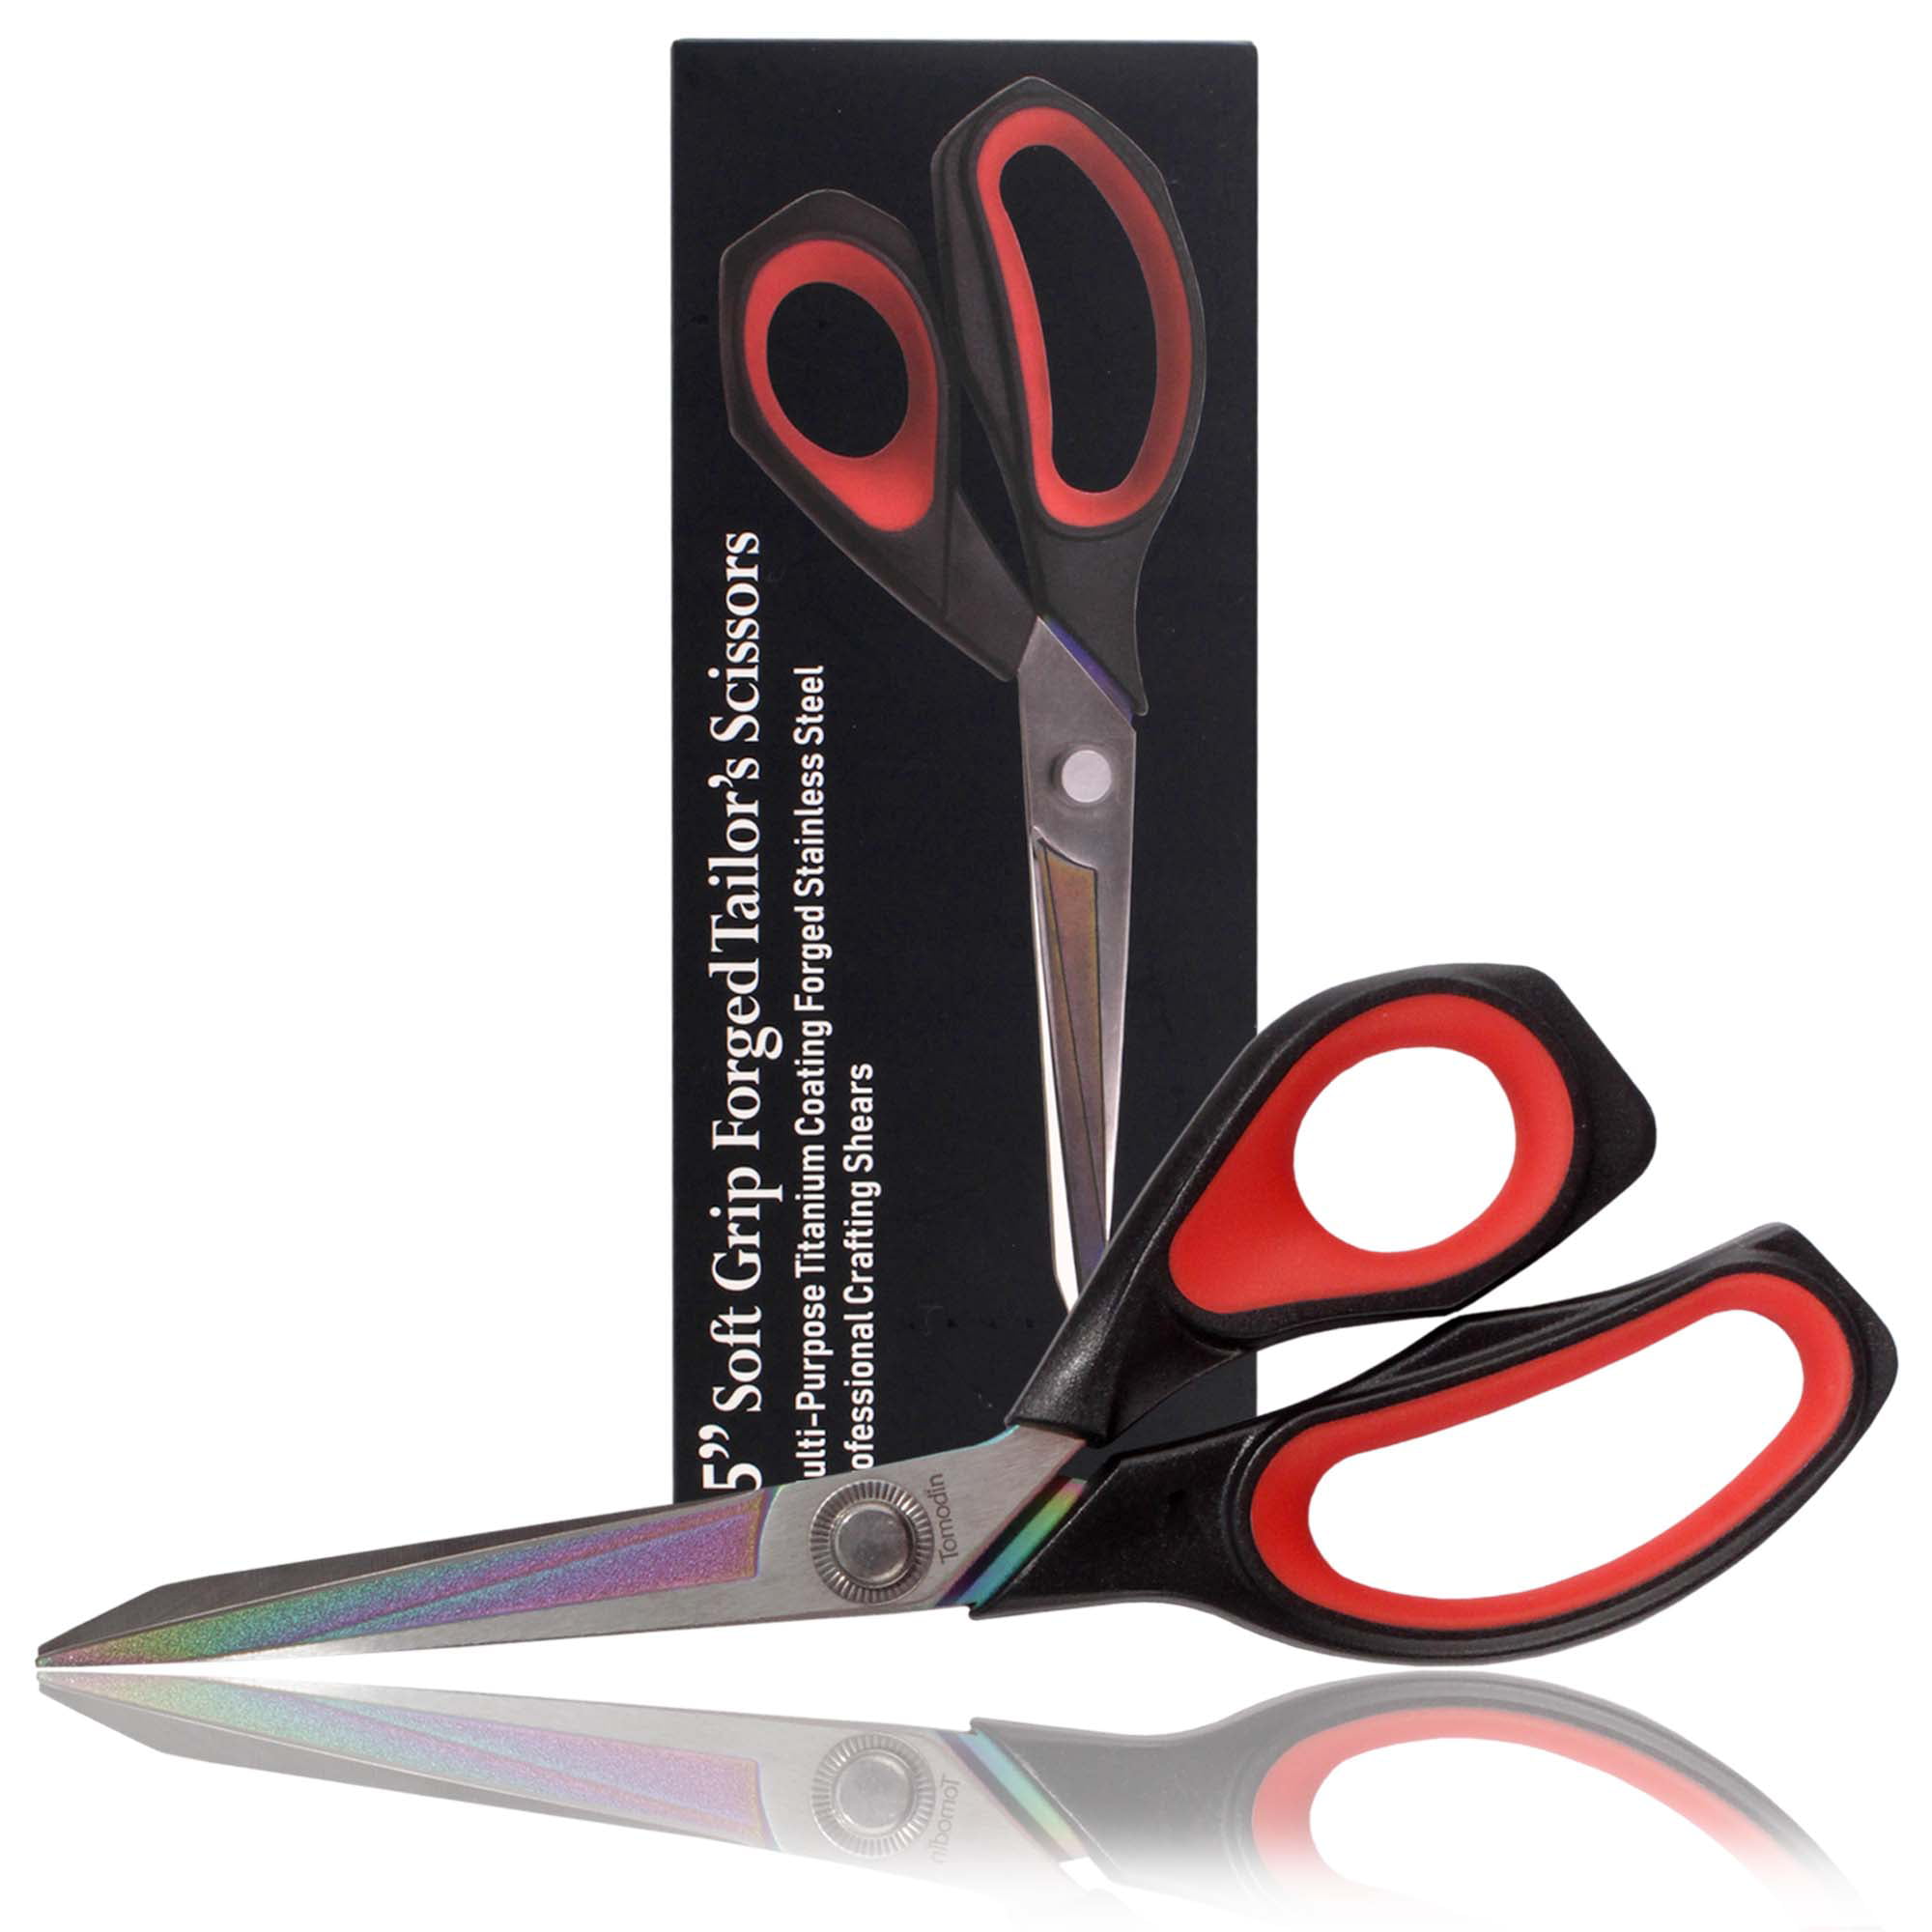 LIVINGO Premium Tailor Scissors Heavy Duty Multi-Purpose Titanium Coating  Forged Stainless Steel Sewing Fabric Leather Dressmaking Comfort Grip Shears  Professional Crafting (9.5 INCH) Black/Red 9.5